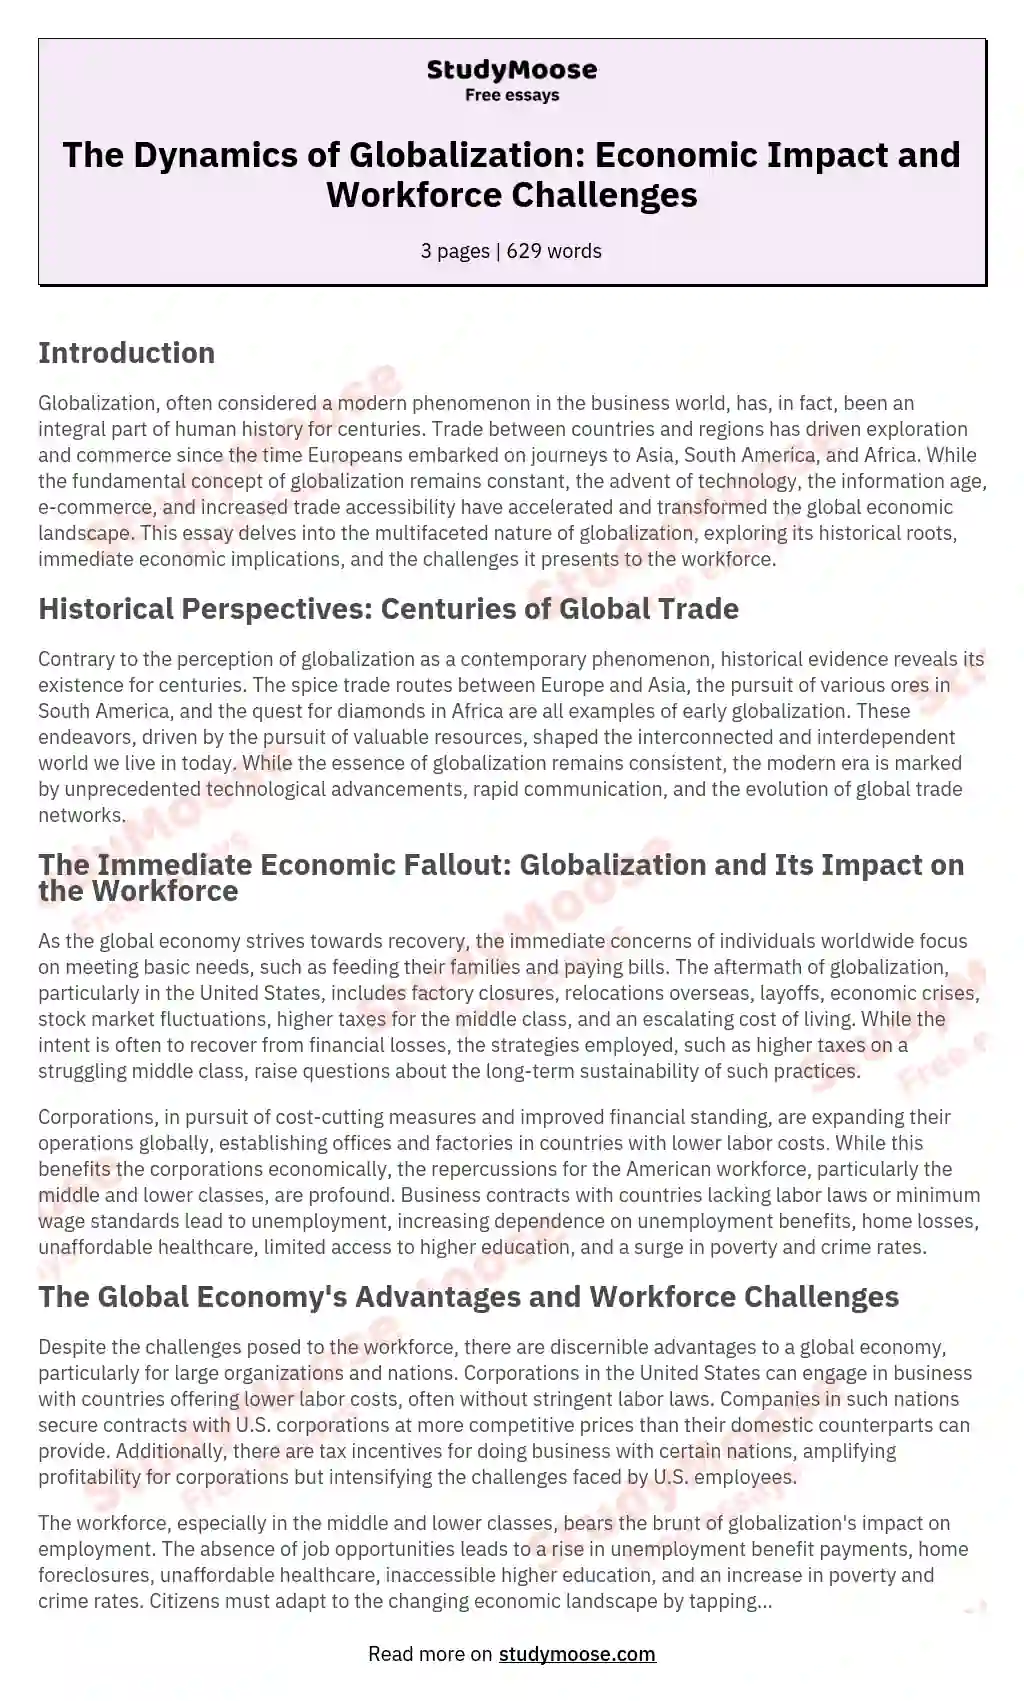 The Dynamics of Globalization: Economic Impact and Workforce Challenges essay